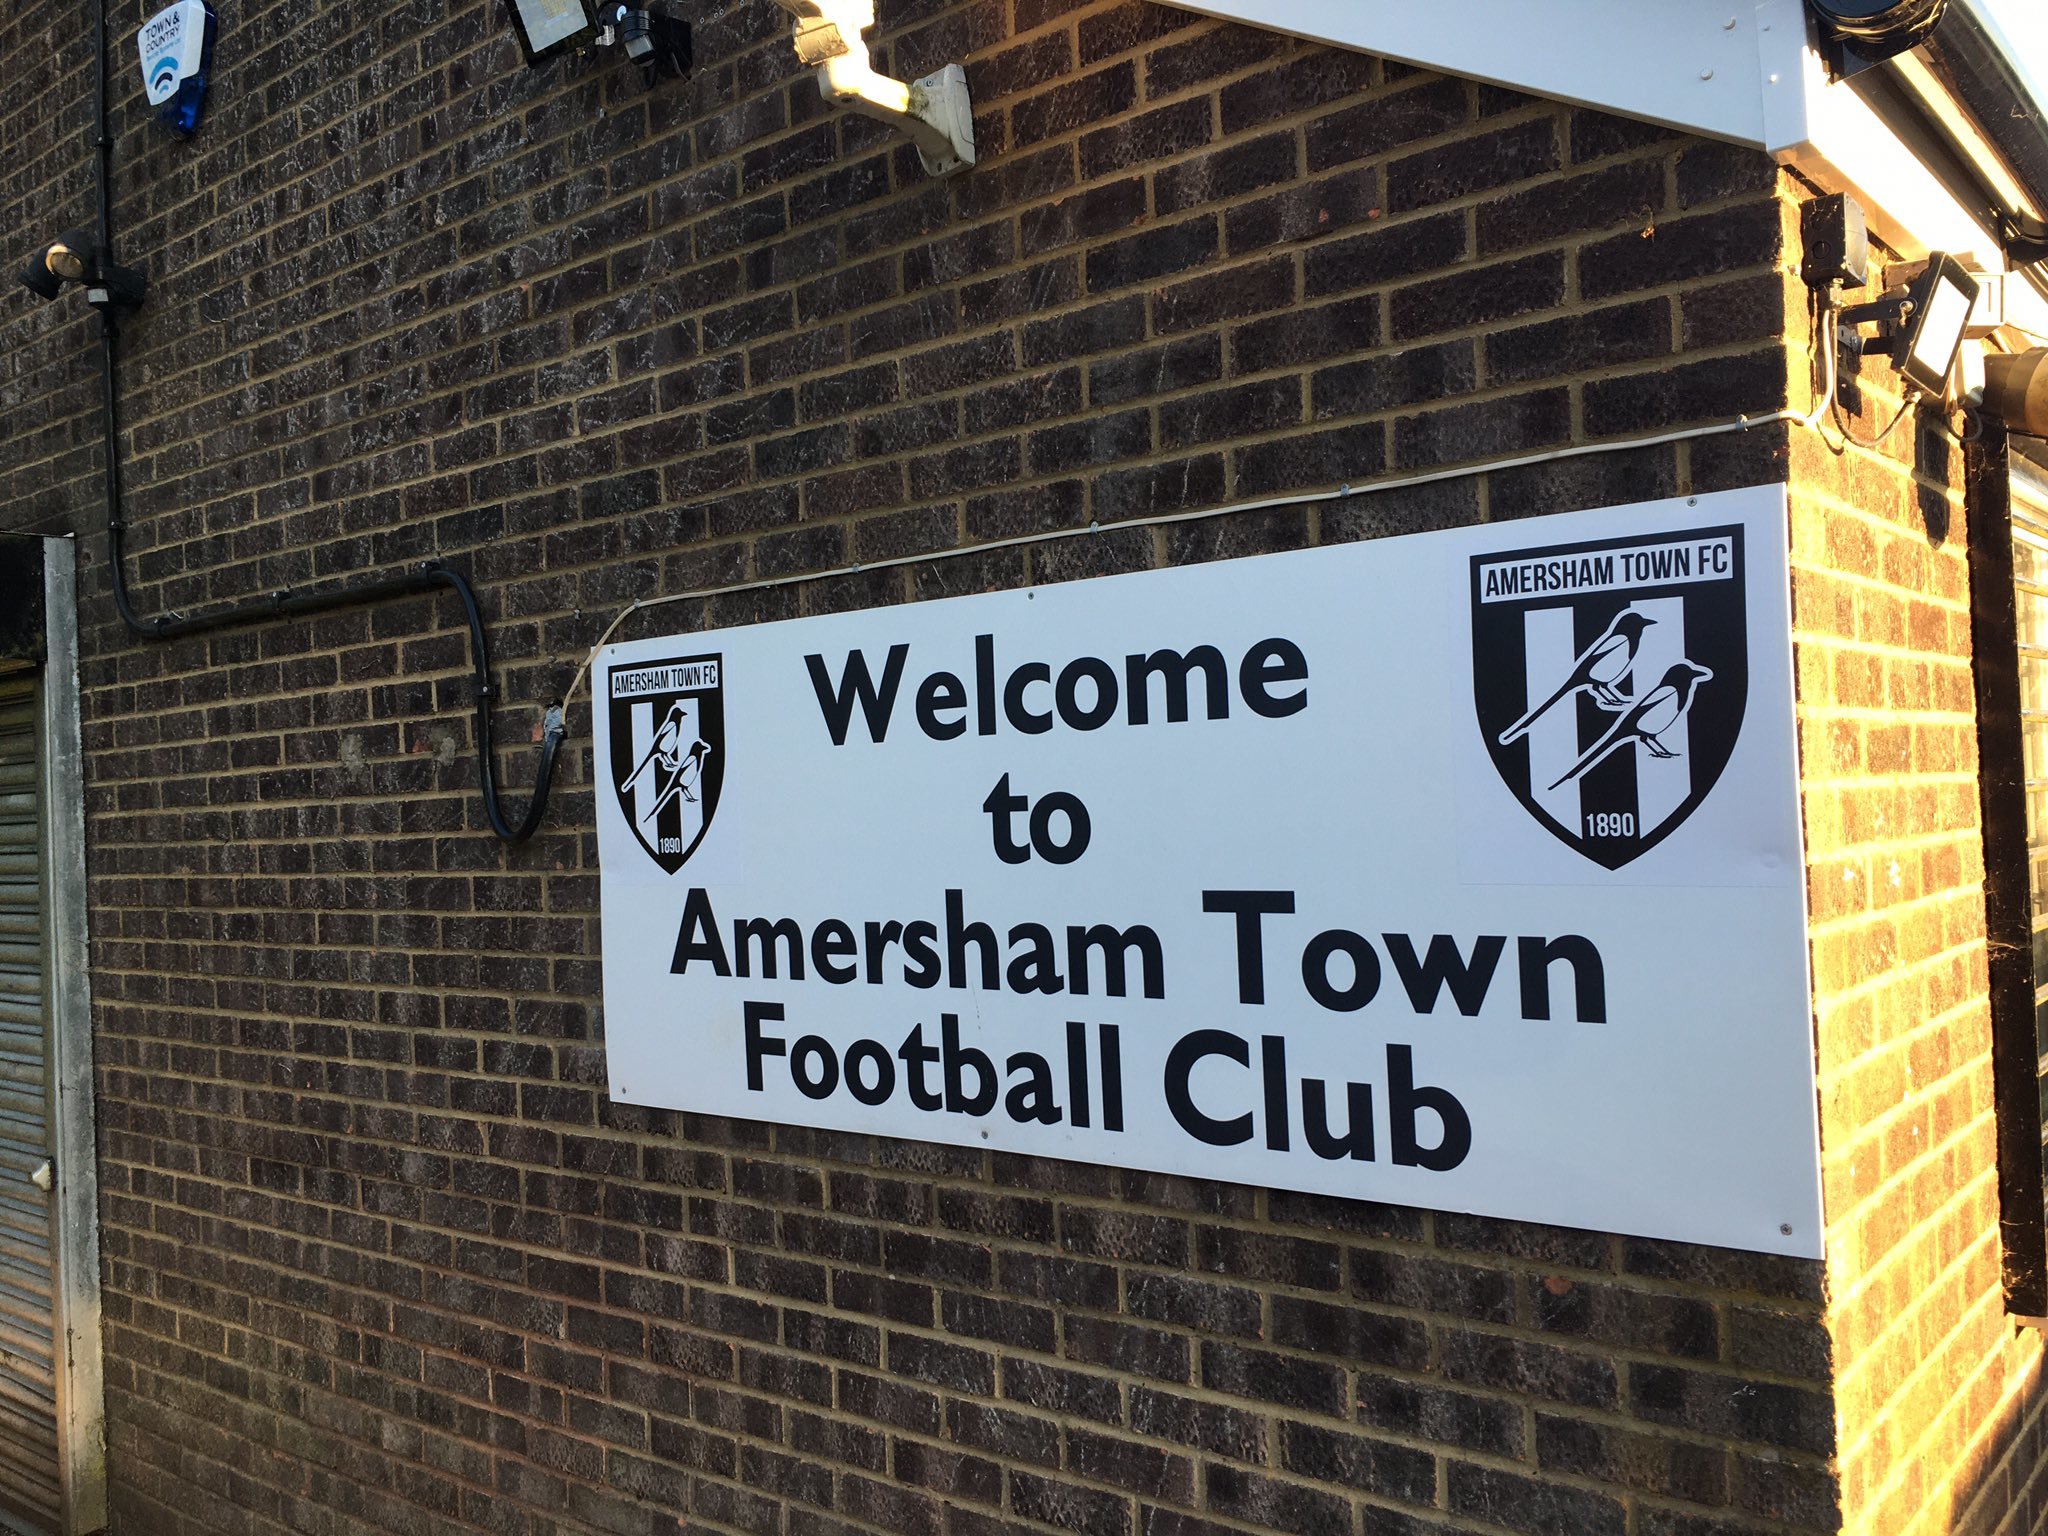 Amersham Town are second bottom in their table 